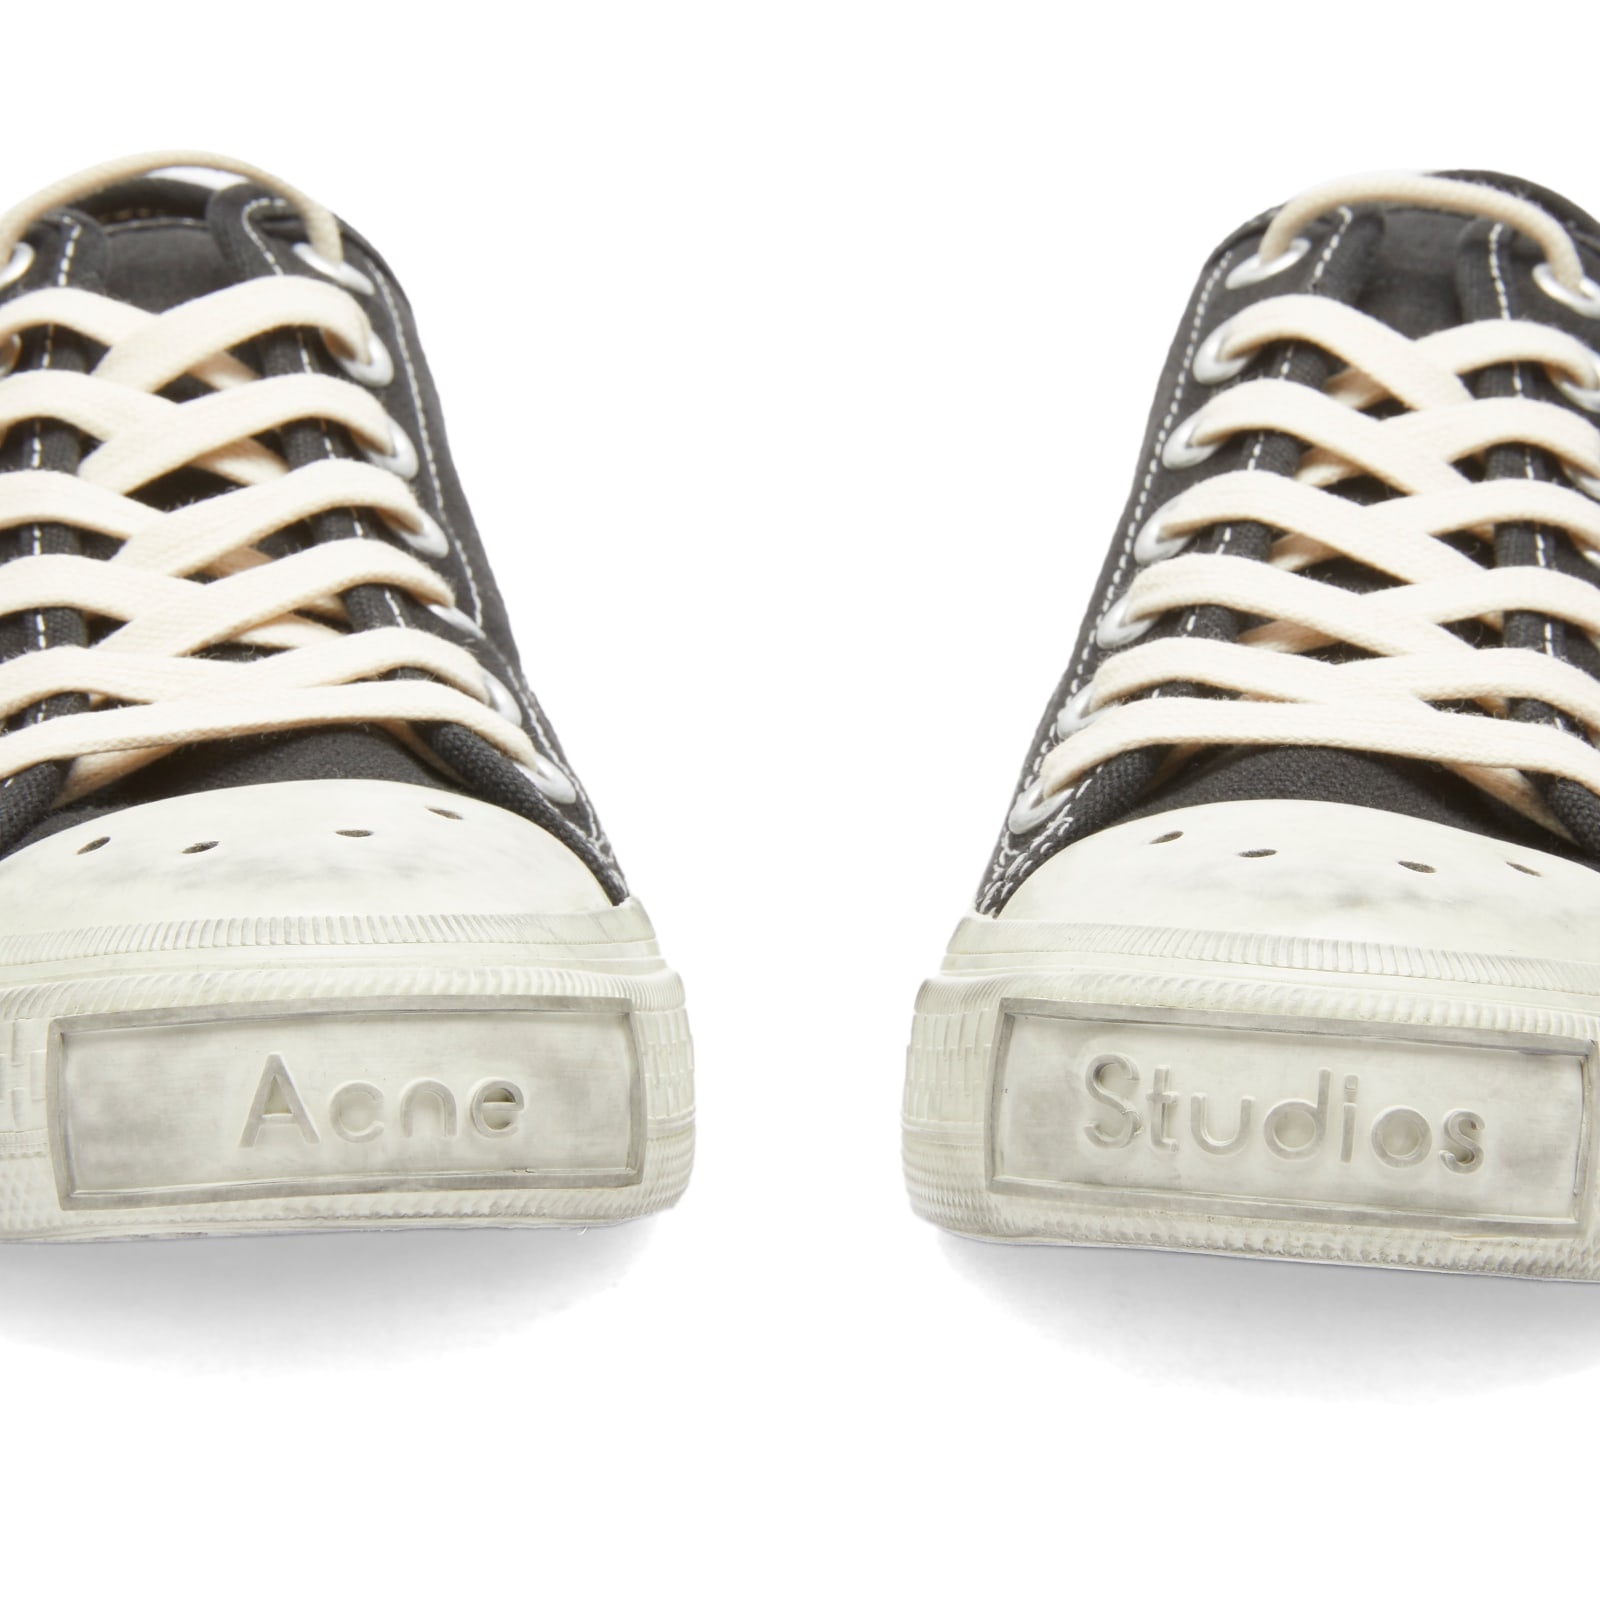 Acne Studios Ballow Soft Tumbled Tag Sneakers - 4